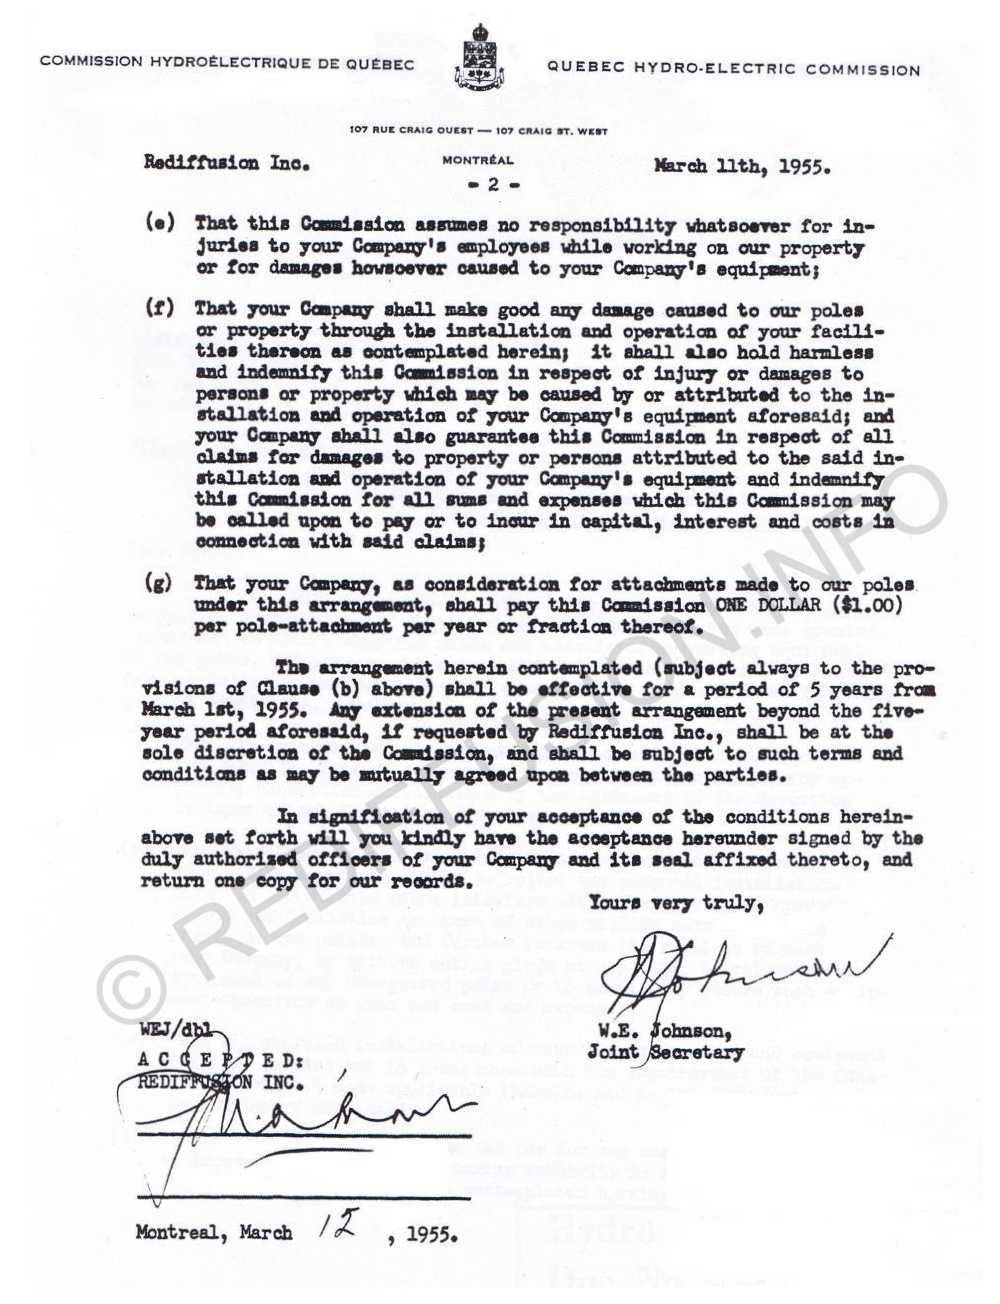 Revised Agreement (part b), March1955